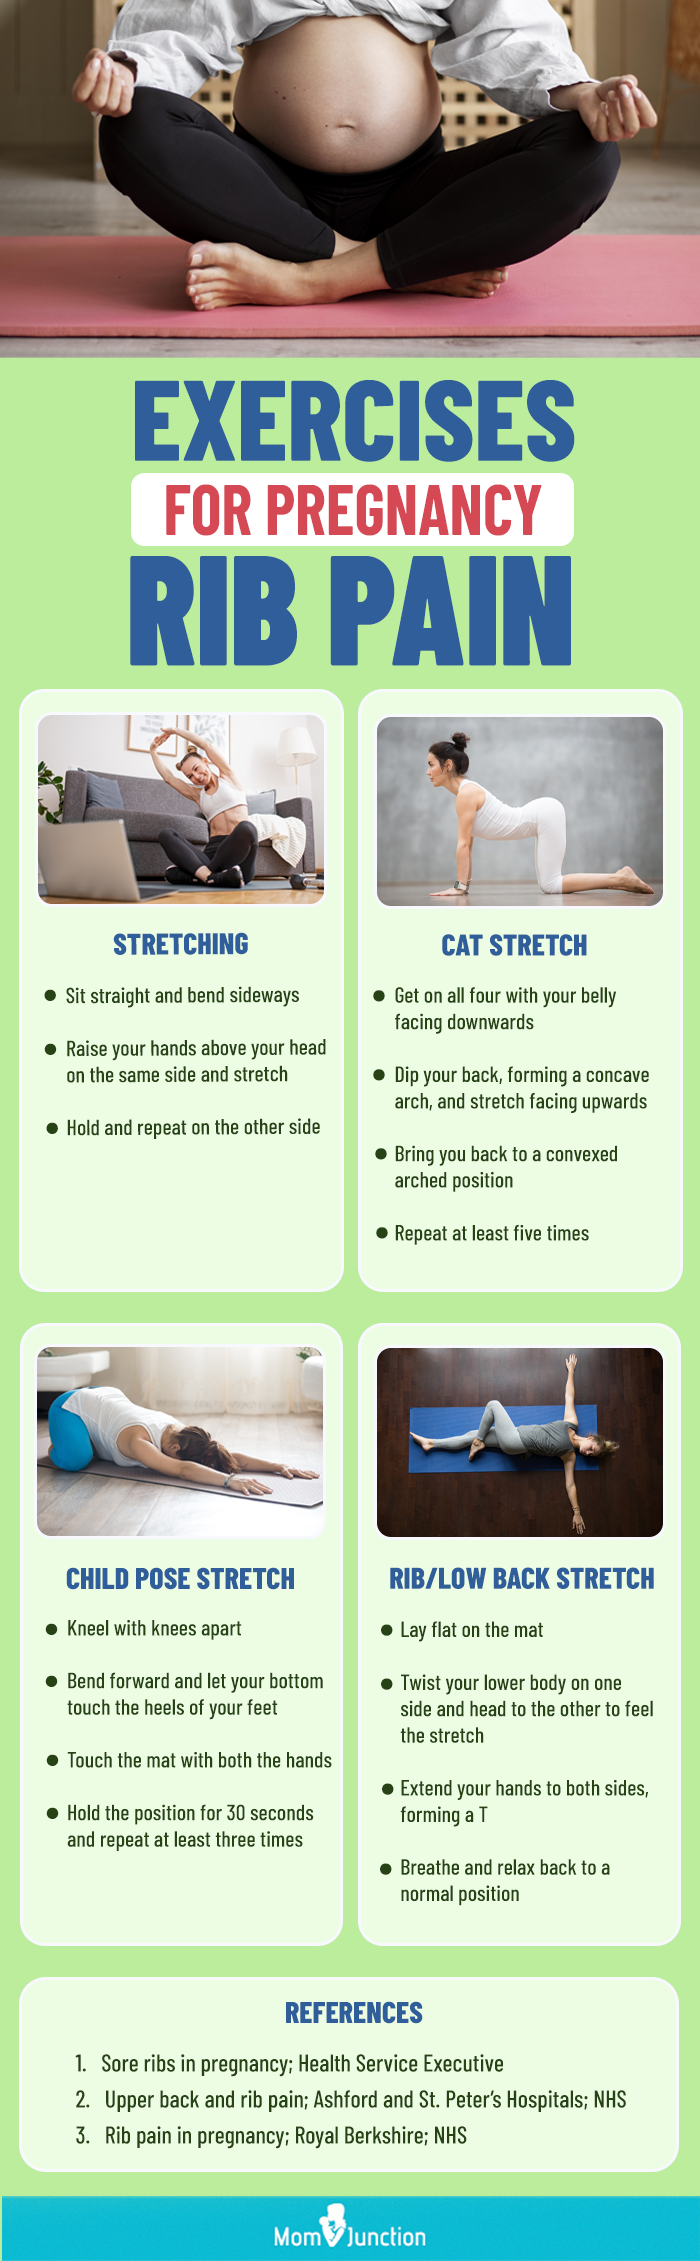 exercises for pregnancy rib pain (infographic)